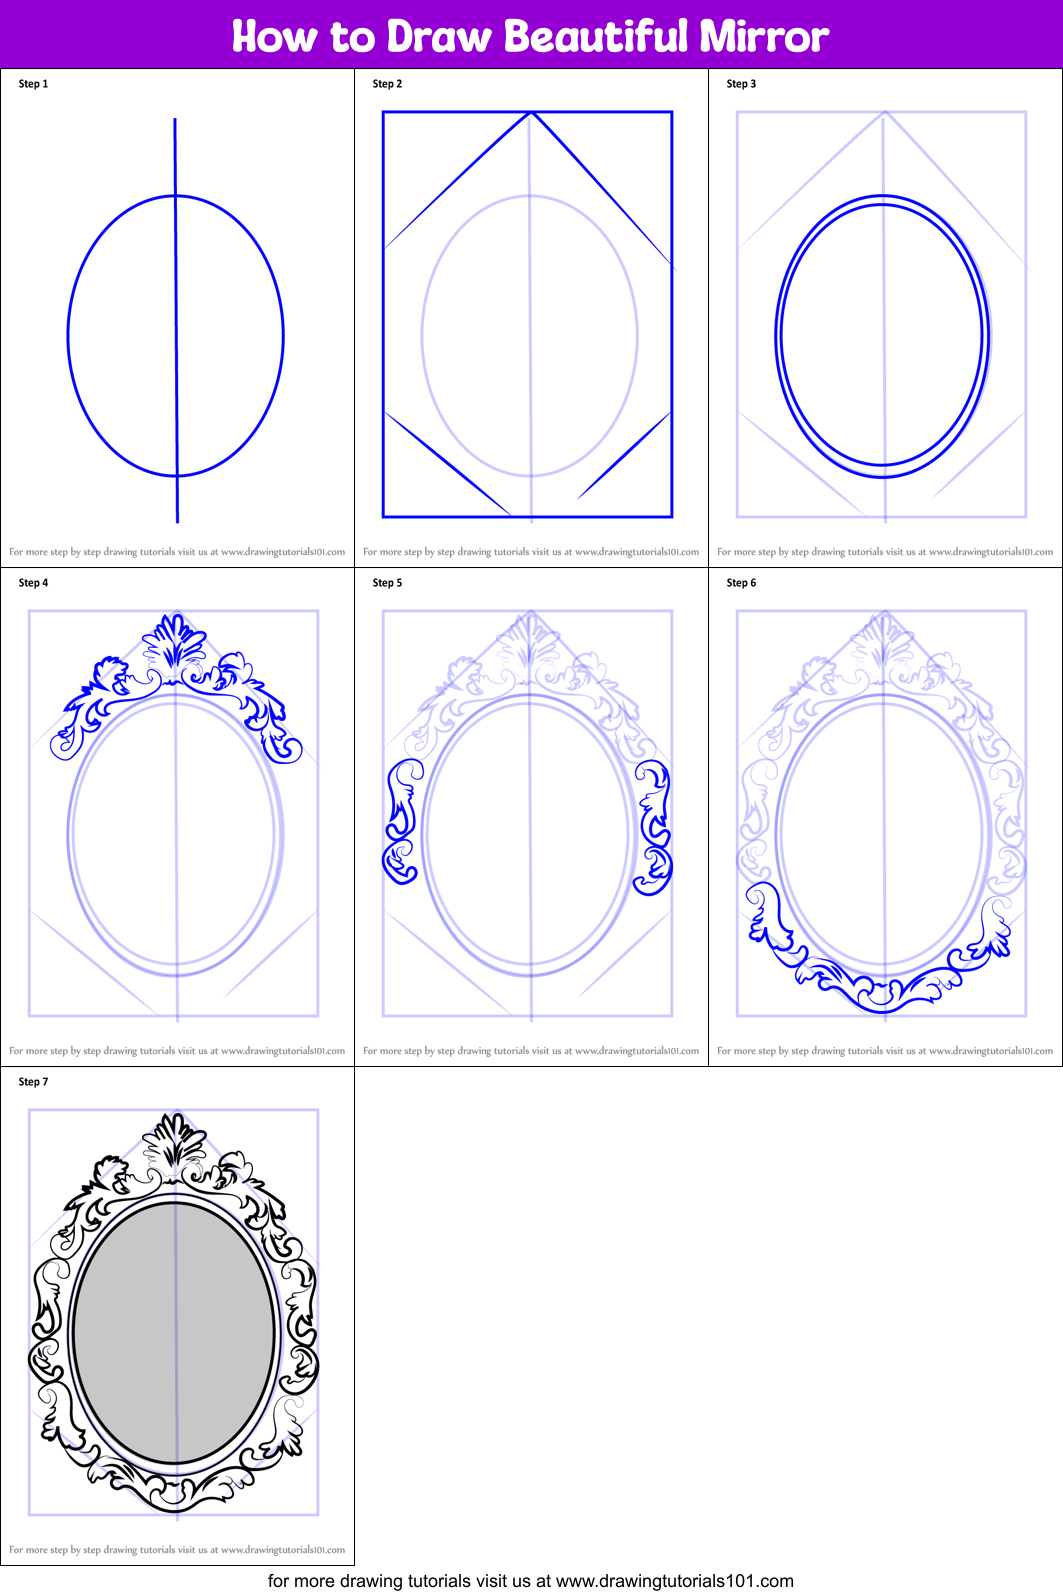 How to Draw Beautiful Mirror printable step by step drawing sheet